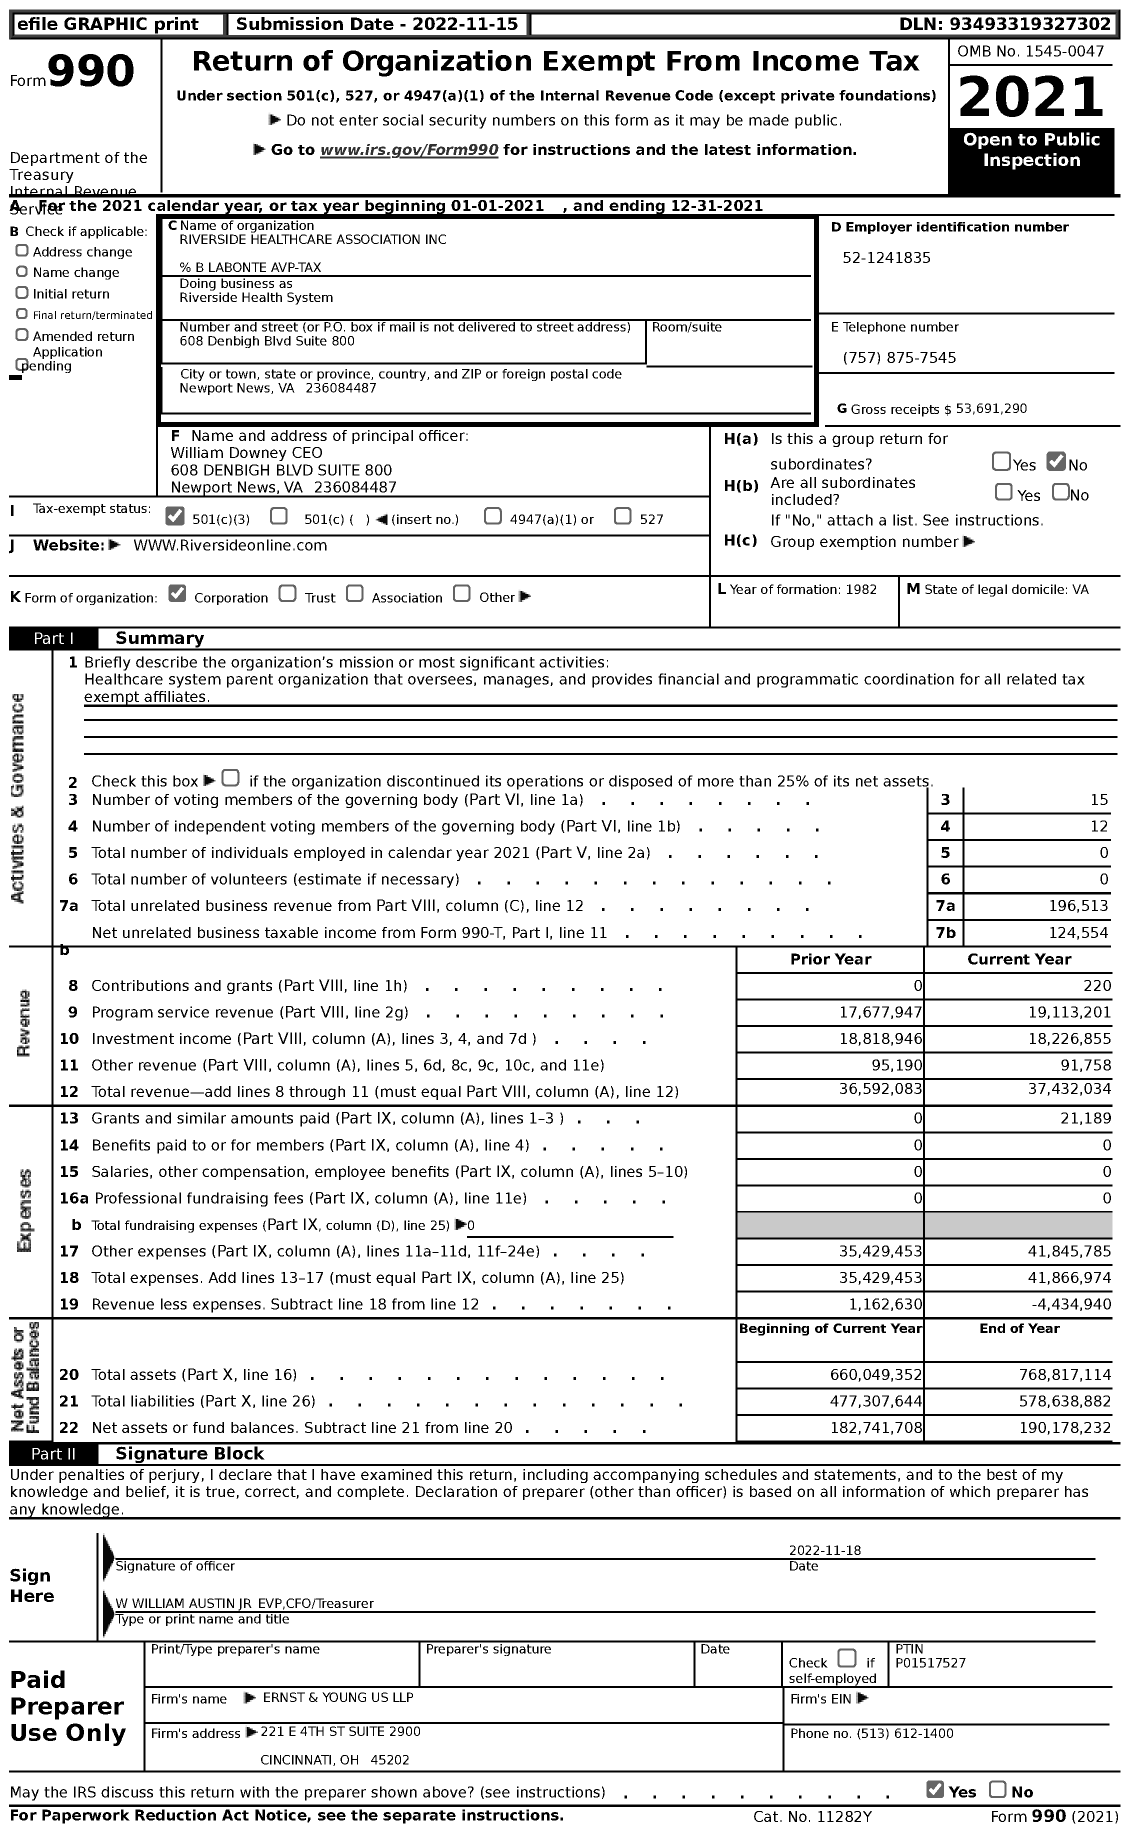 Image of first page of 2021 Form 990 for Riverside Healthcare System (RHS)